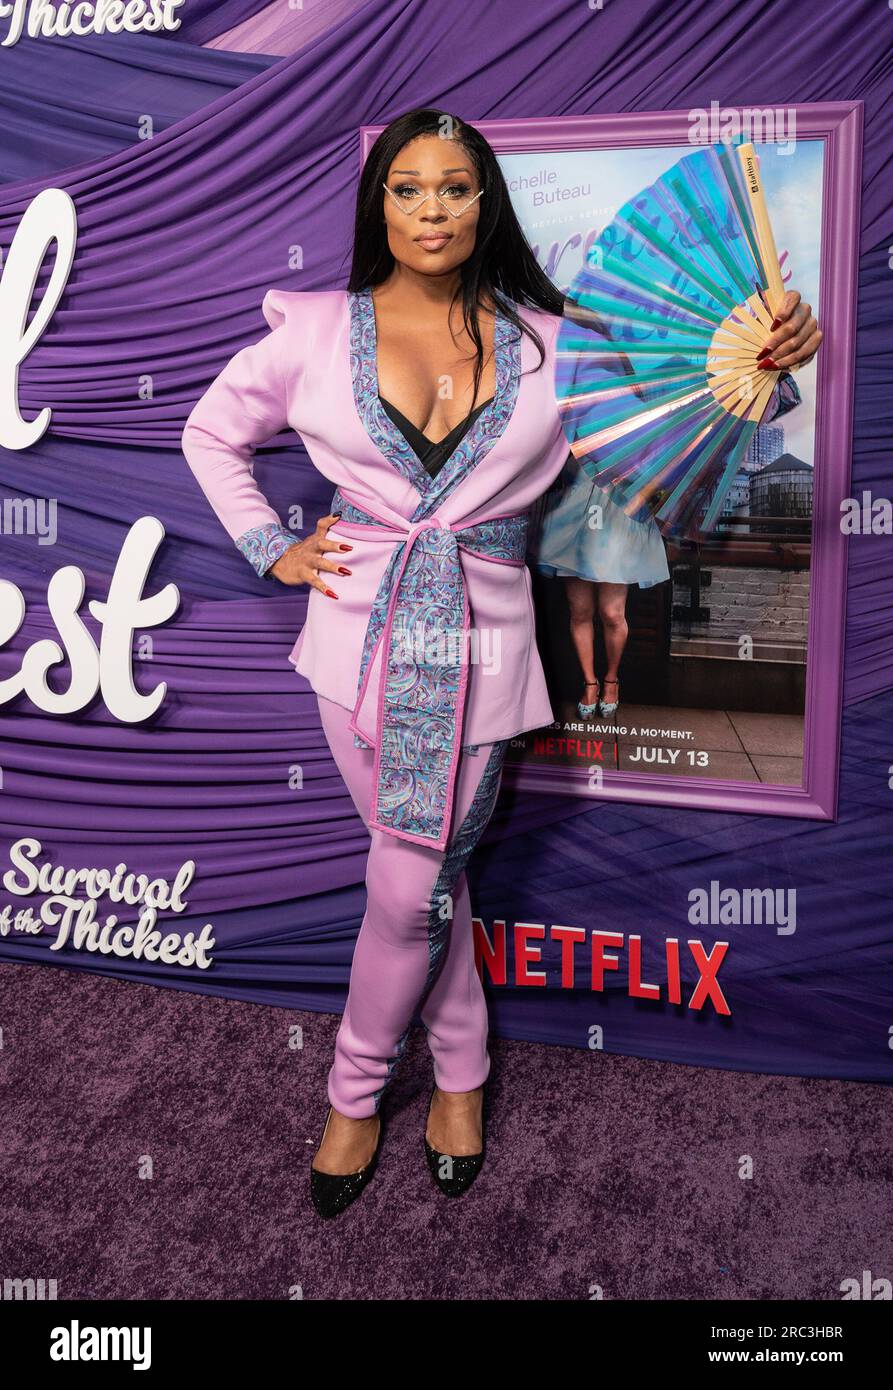 Peppermint Is the Real Star of Netflix's 'Survival of the Thickest